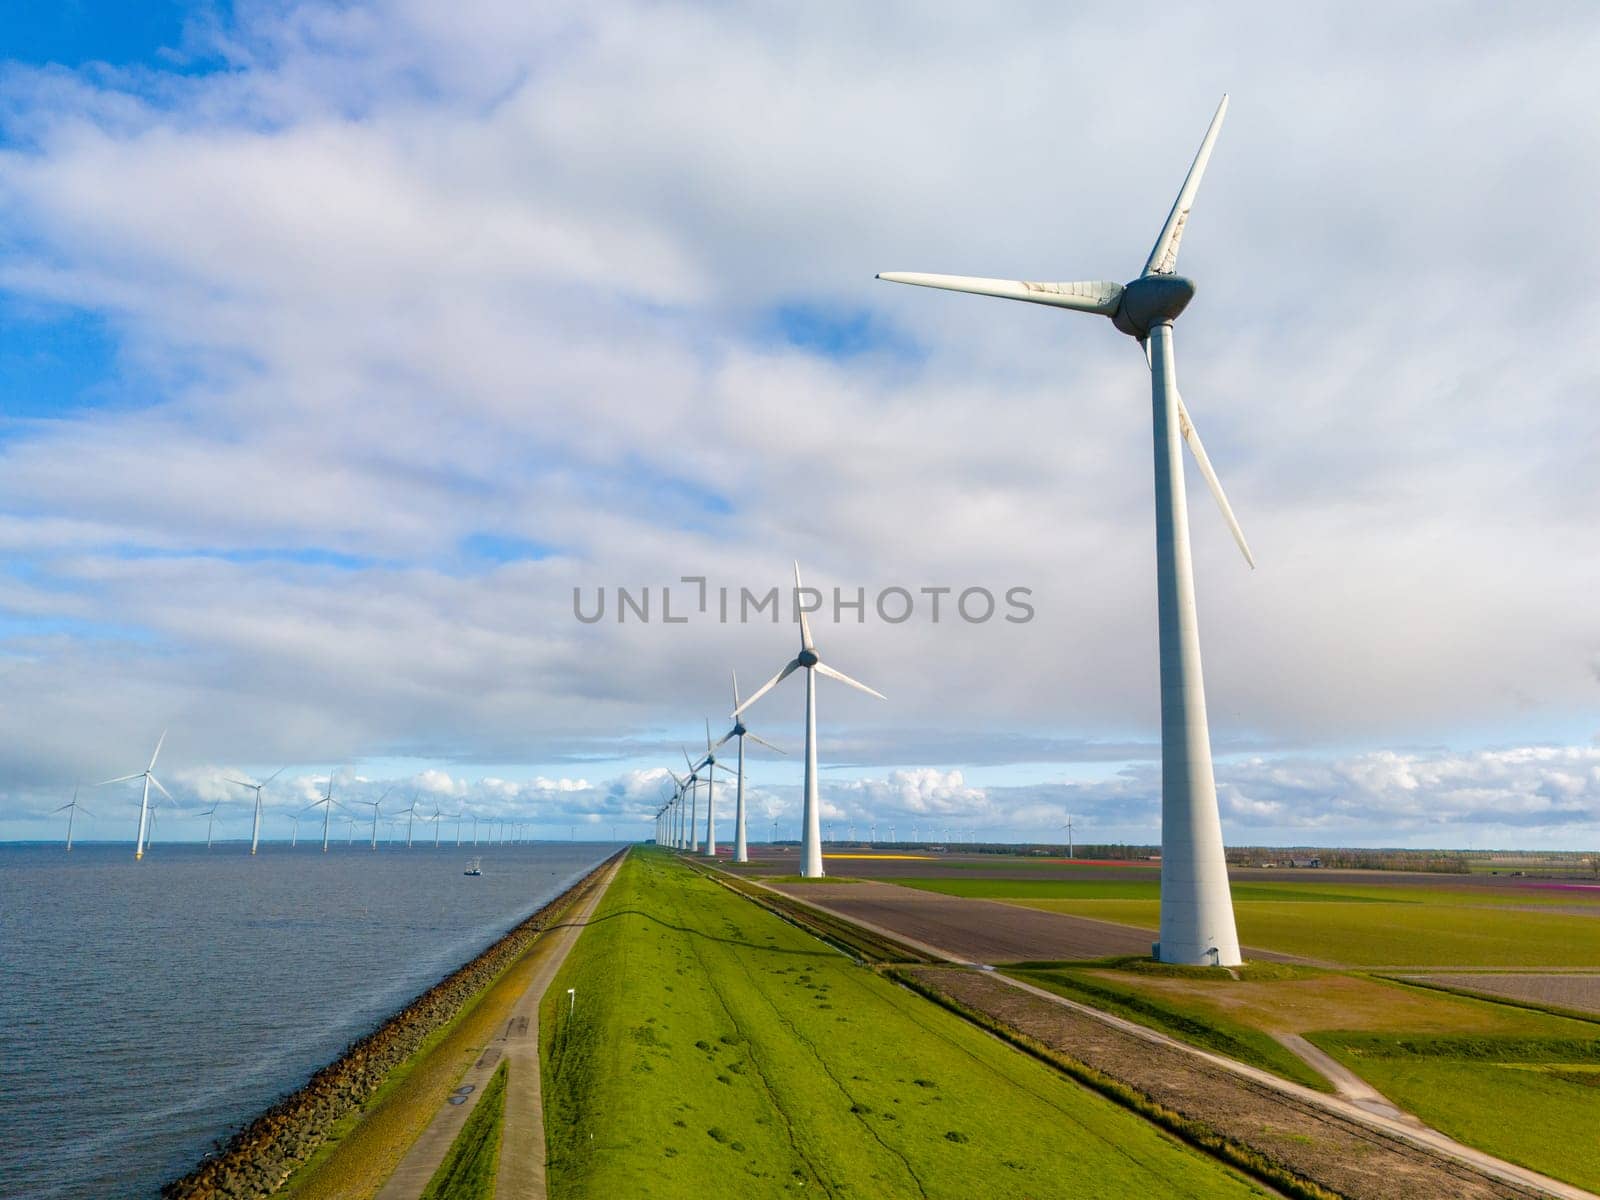 A picturesque scene of sleek wind turbines standing tall in a row next to a tranquil body of water, harnessing renewable energy on a bright Spring day by fokkebok